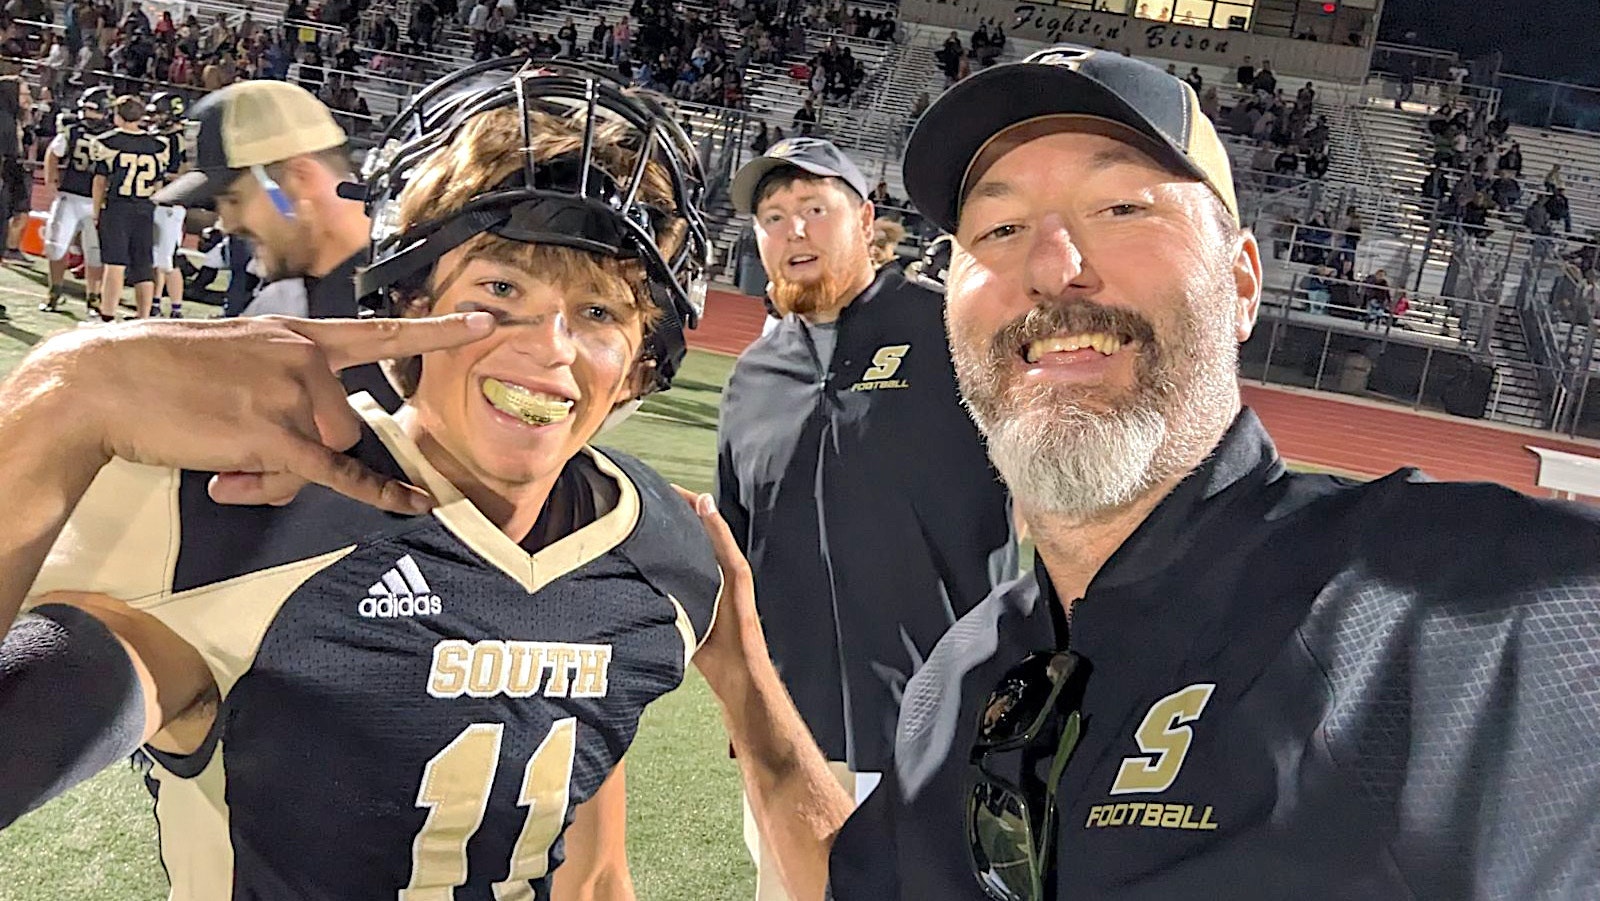 Cheyenne South Senior Keelan Anderson, left, and coach Eli Moody celebrate after Anderson nailed a state-record 61-yard field goal.